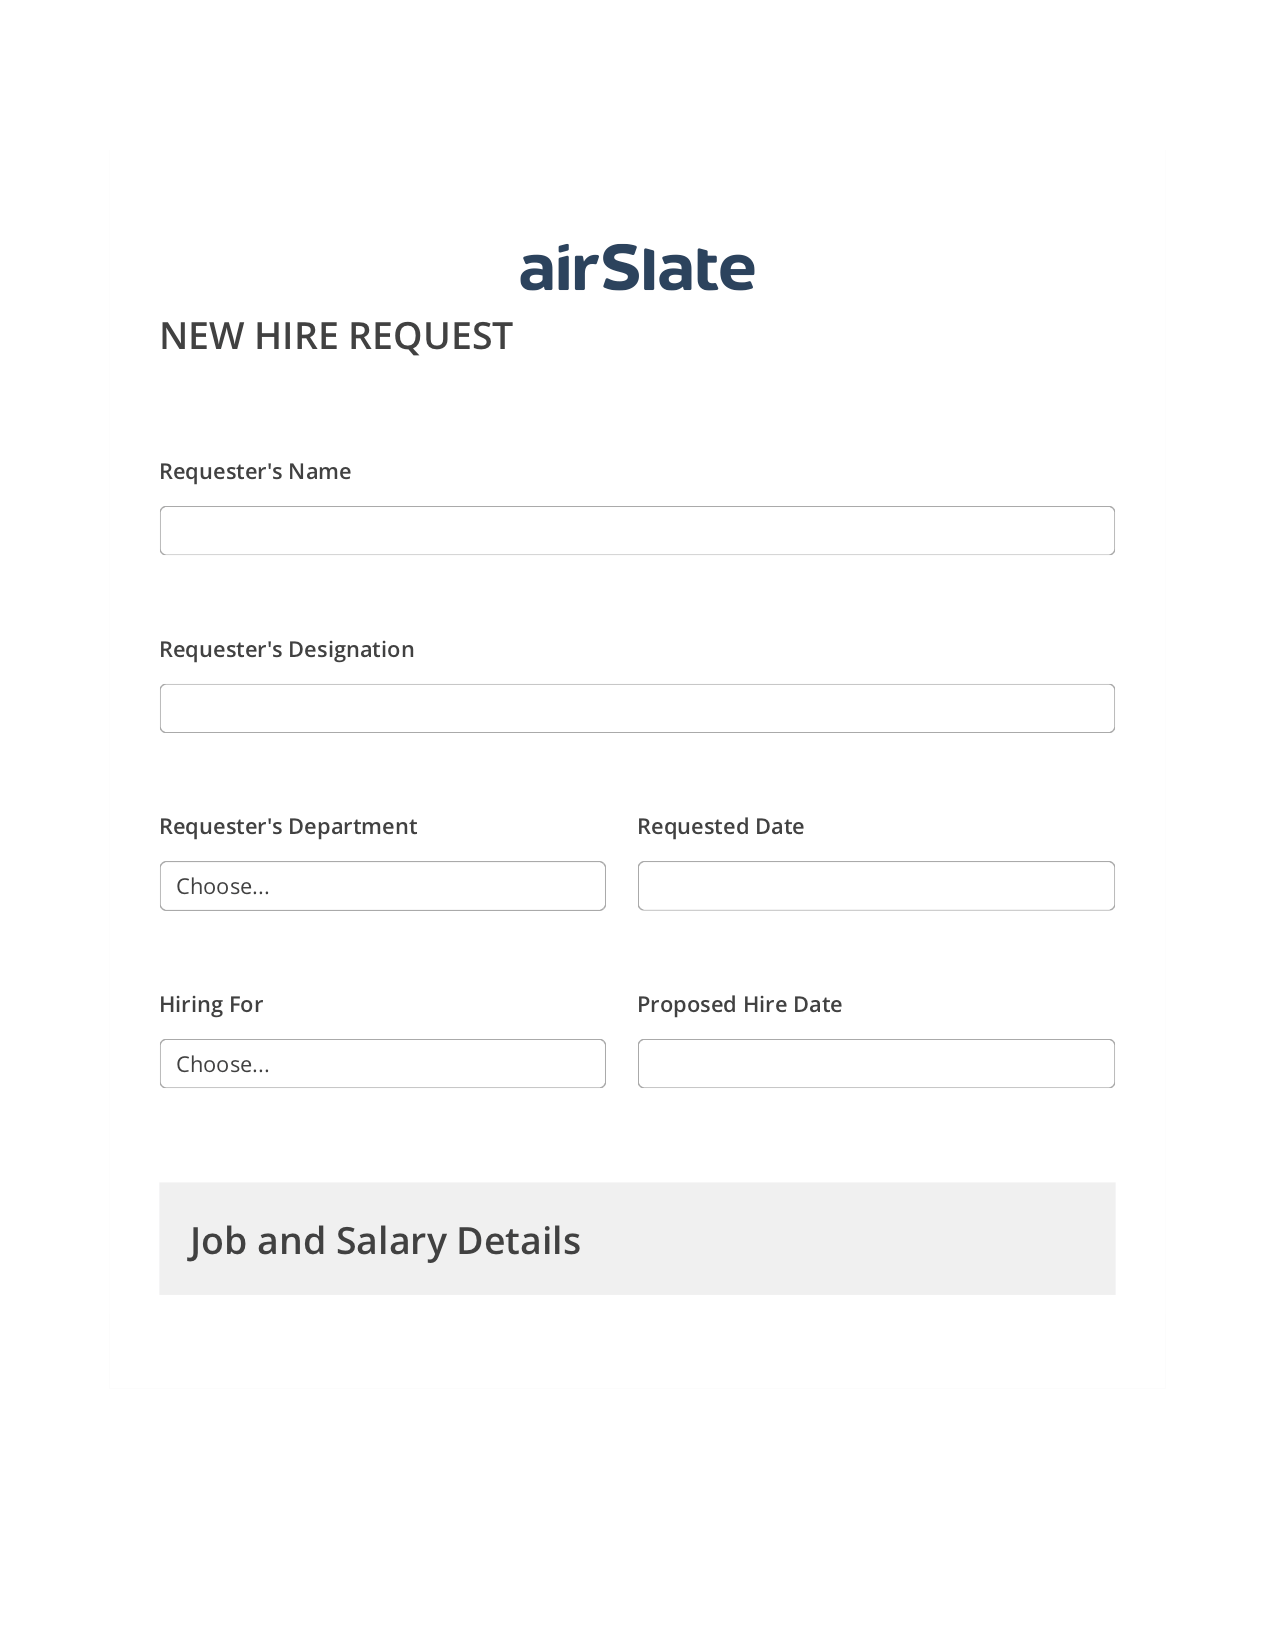 Hiring Request Workflow Pre-fill Dropdowns from Google Sheet Bot, Unassign Role Bot, Export to WebMerge Bot